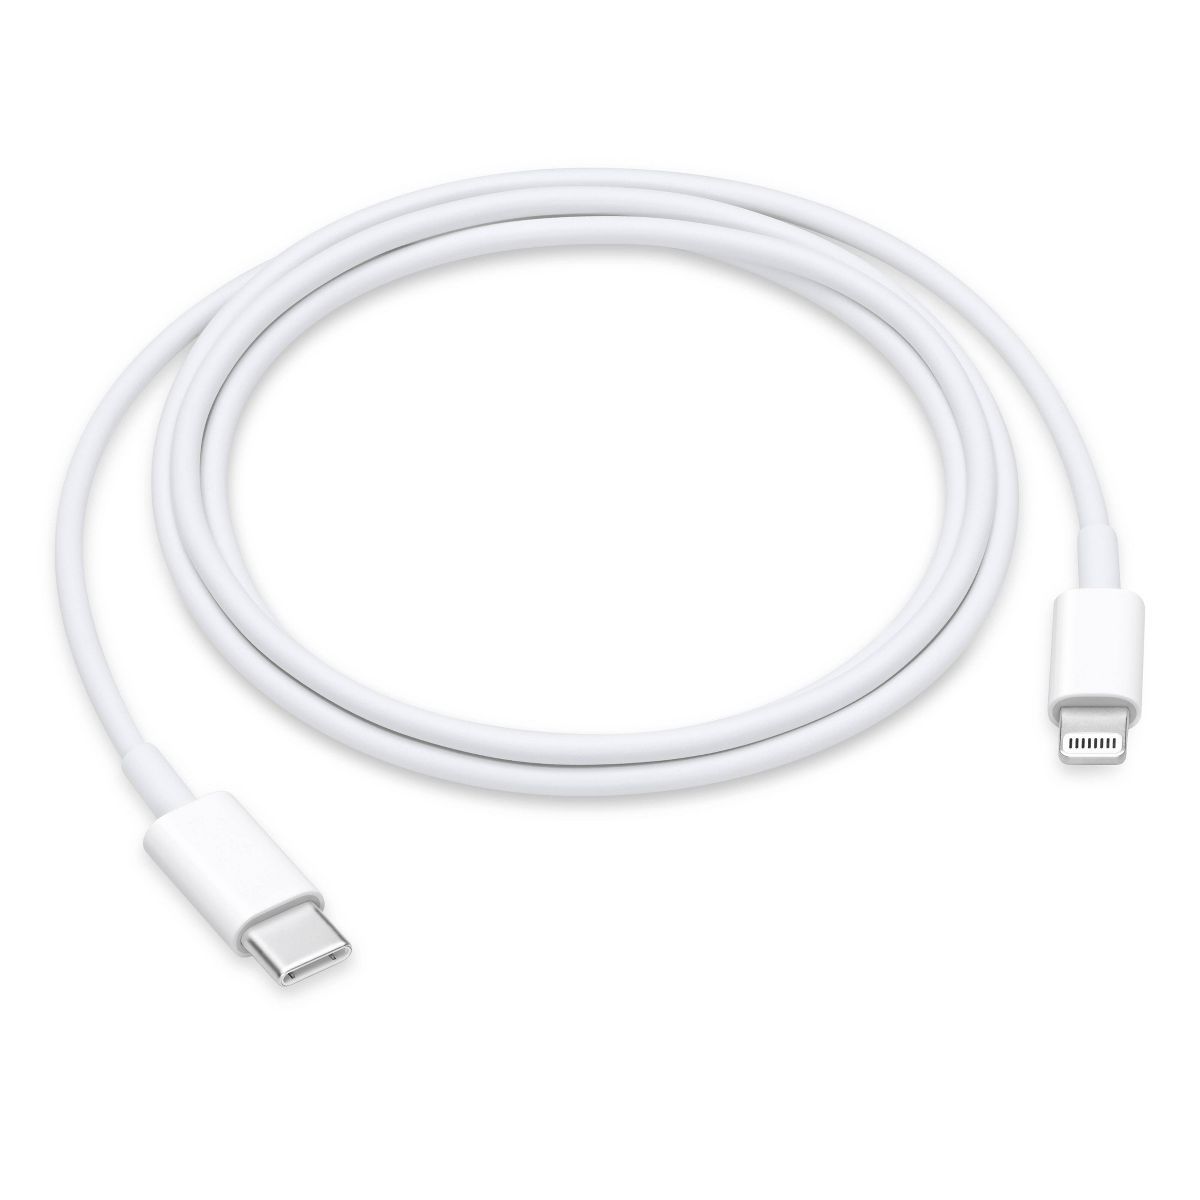 Apple USB-C to Lightning Cable (1m) | Target